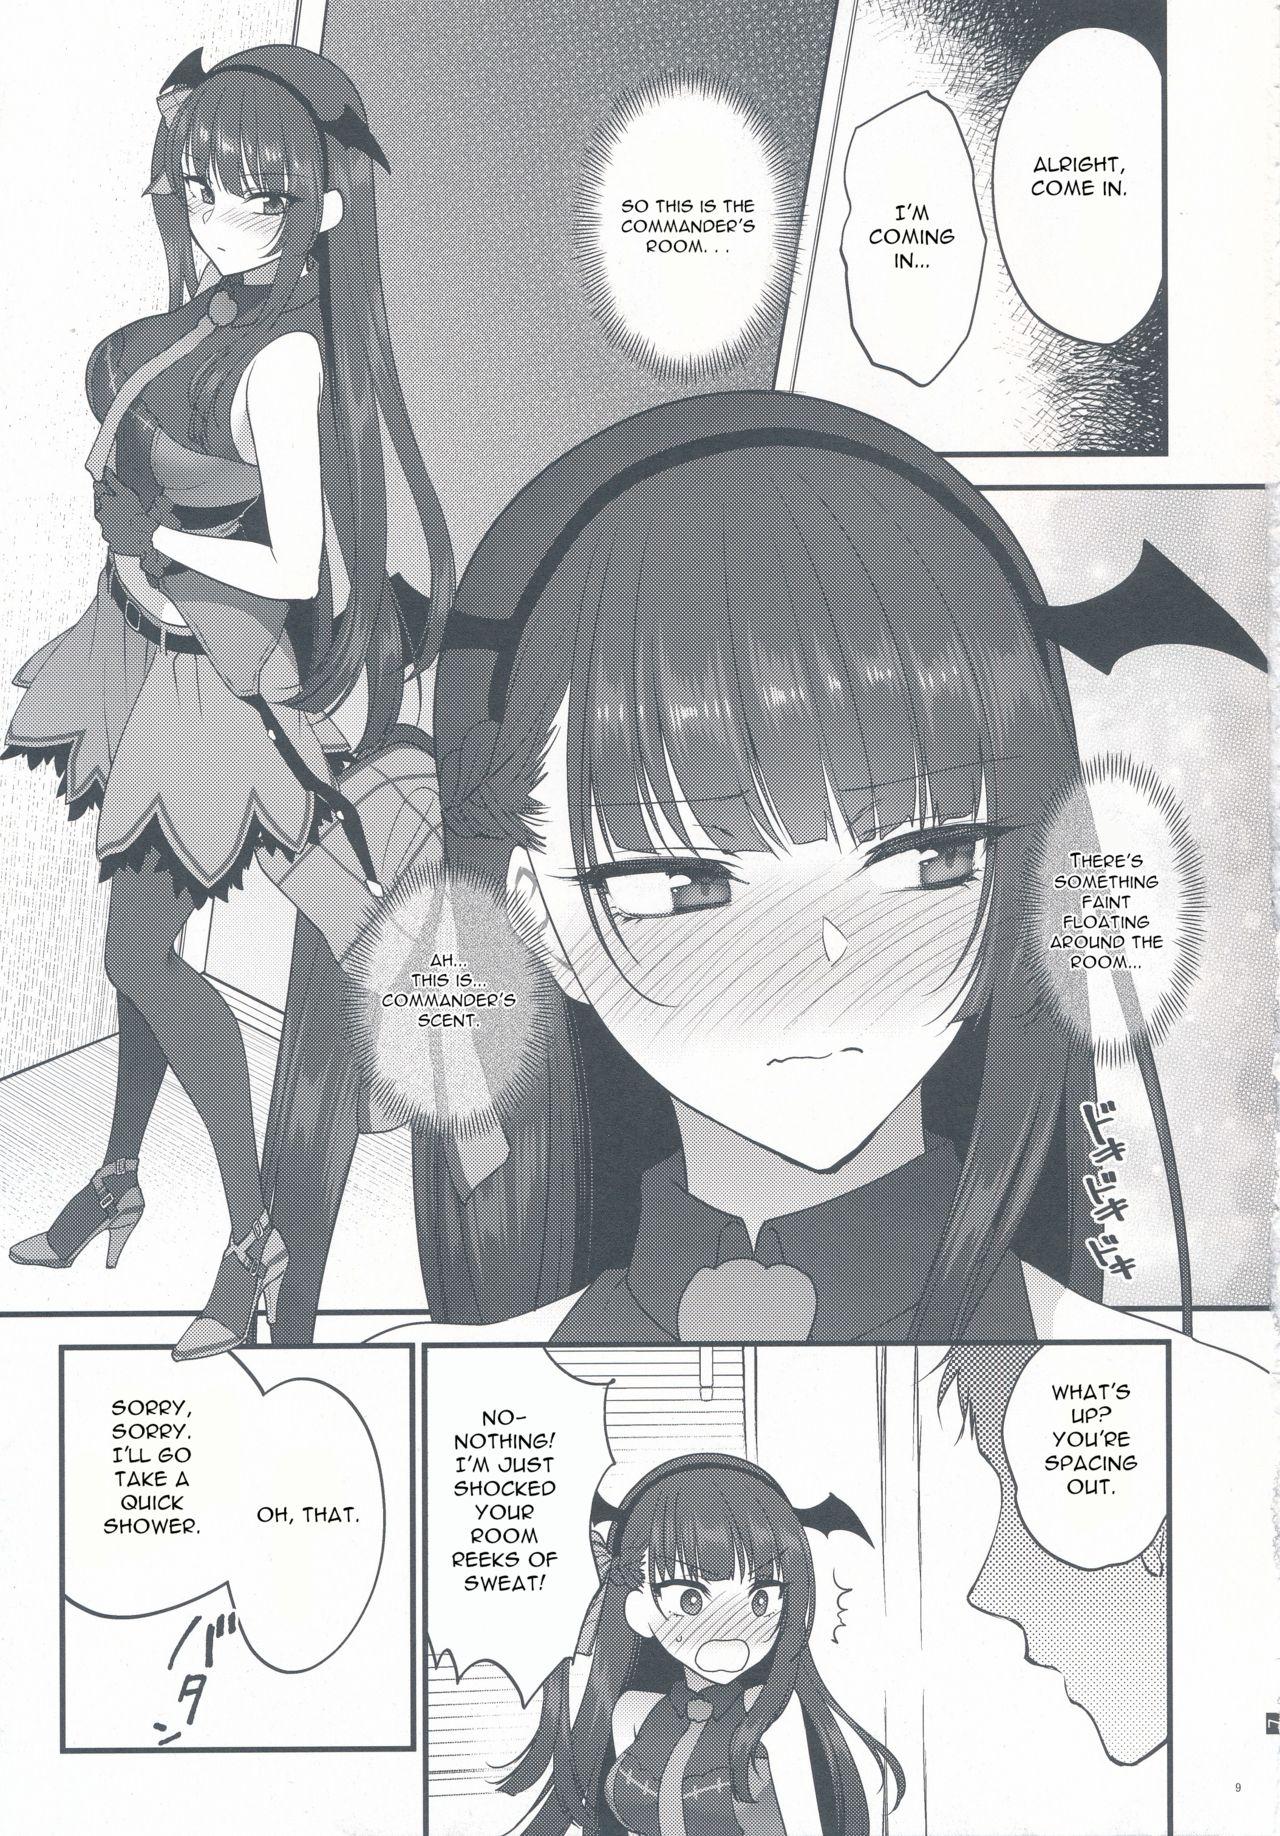 Jeune Mec Obake nante Inai! - Girls frontline Chacal - Page 9